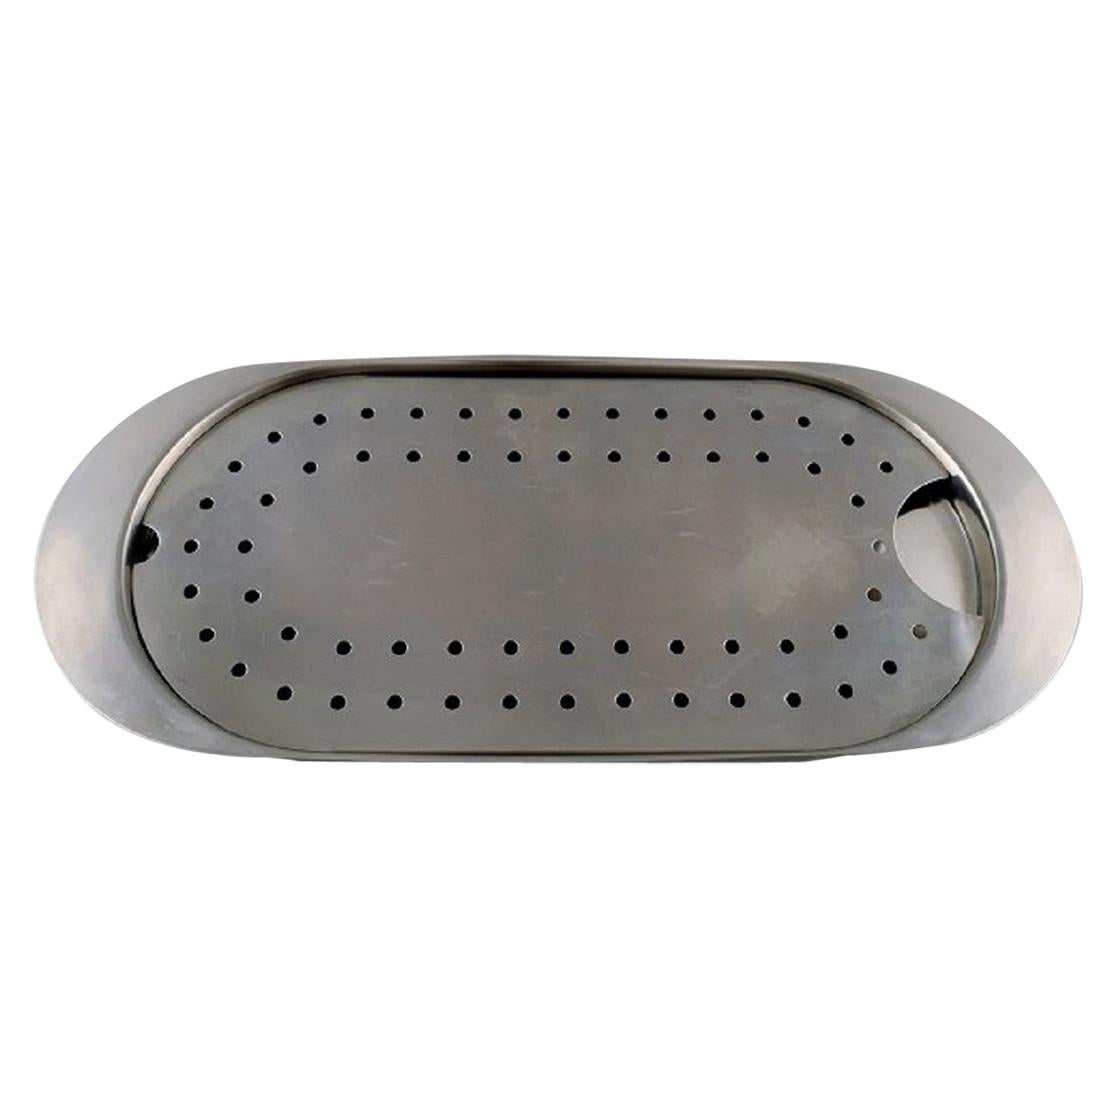 Arne Jacobsen for Stelton, Large "Cylinda Line" Fish Dish in Stainless Steel